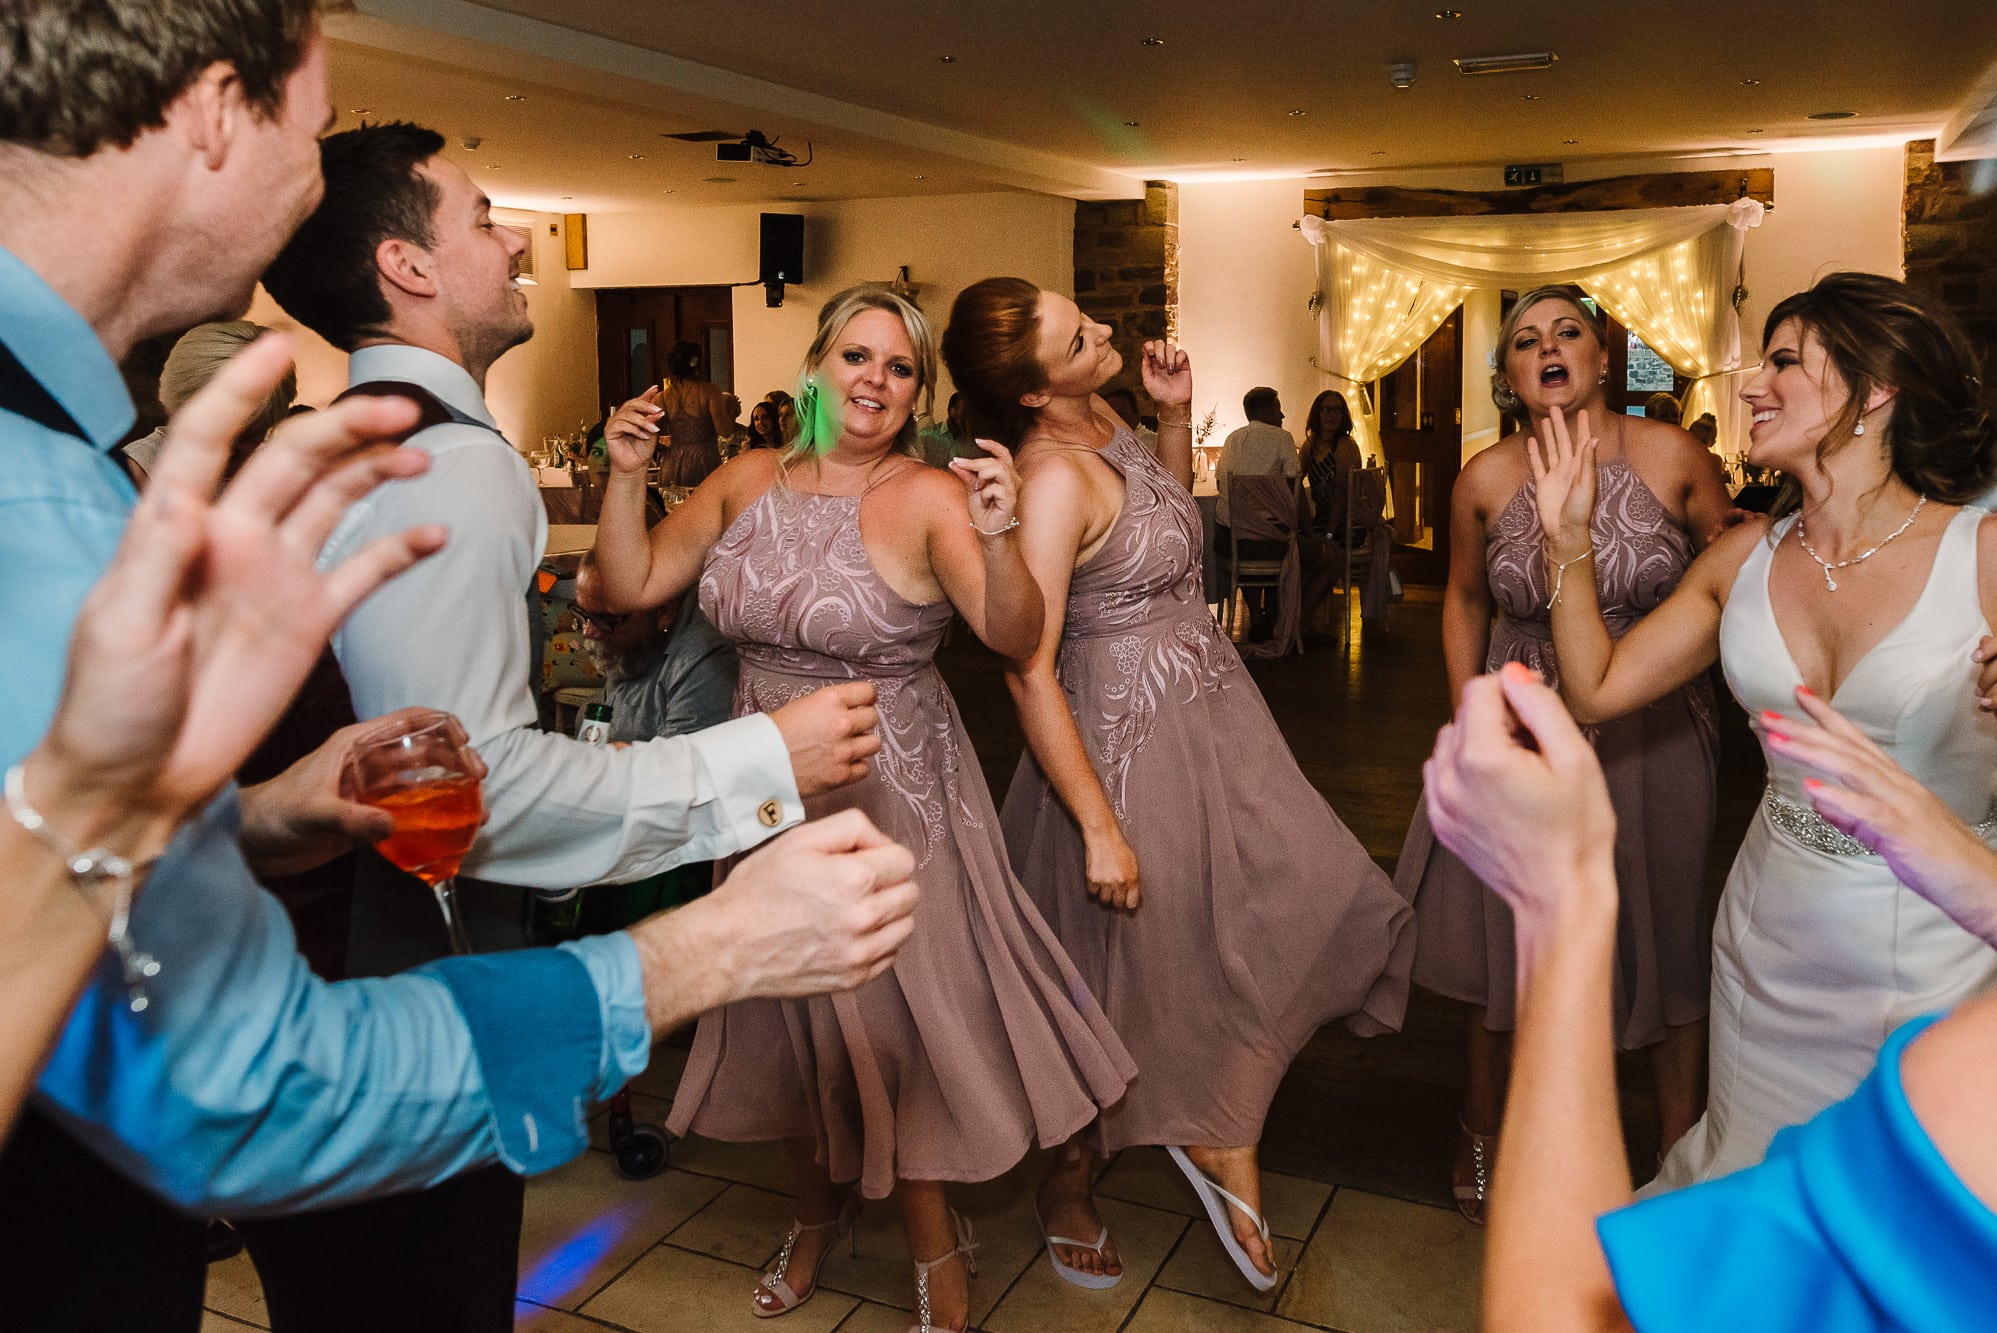 Guests dancing during the evening party at Beeston Manor